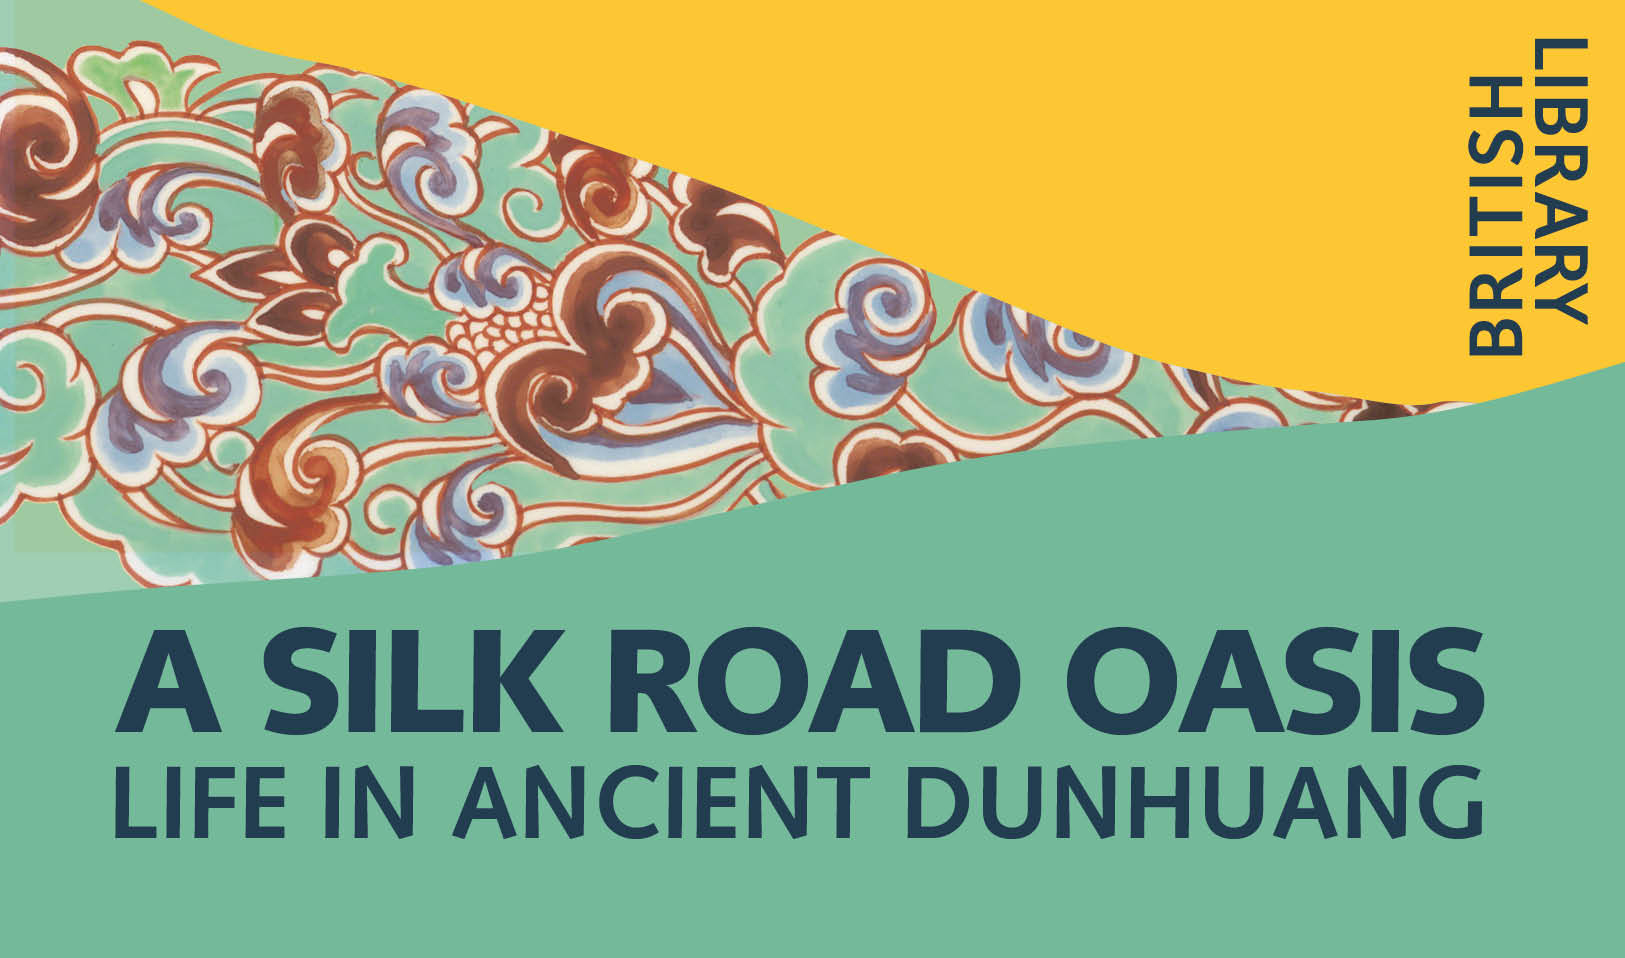 A Silk Road Oasis: Life in Ancient Dunhuang